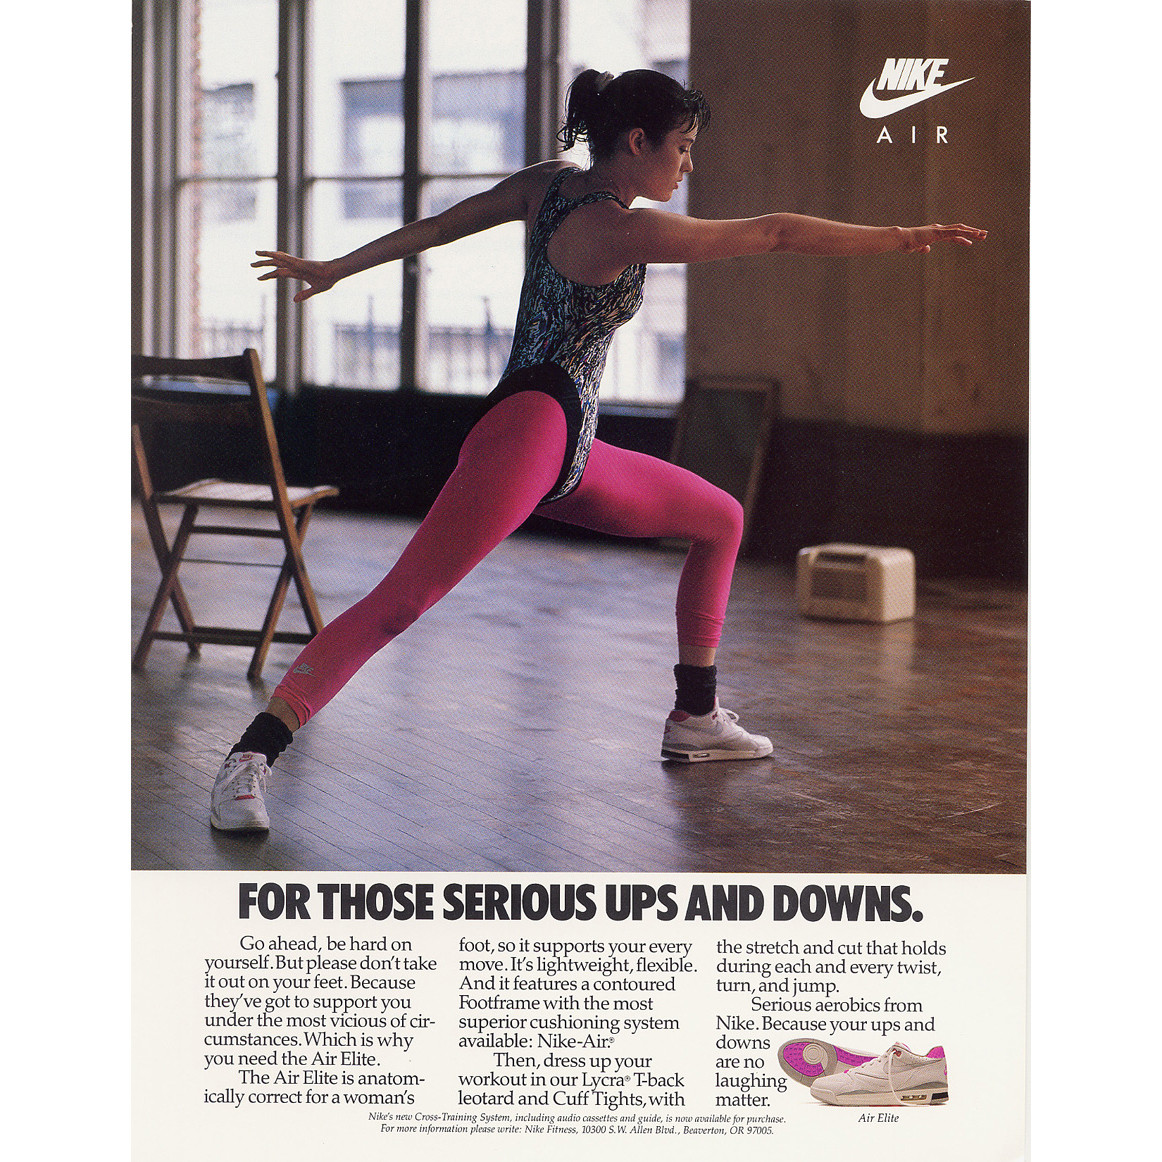 Take A Look At These Retro Nike Ads For Women | HuffPost UK Sports